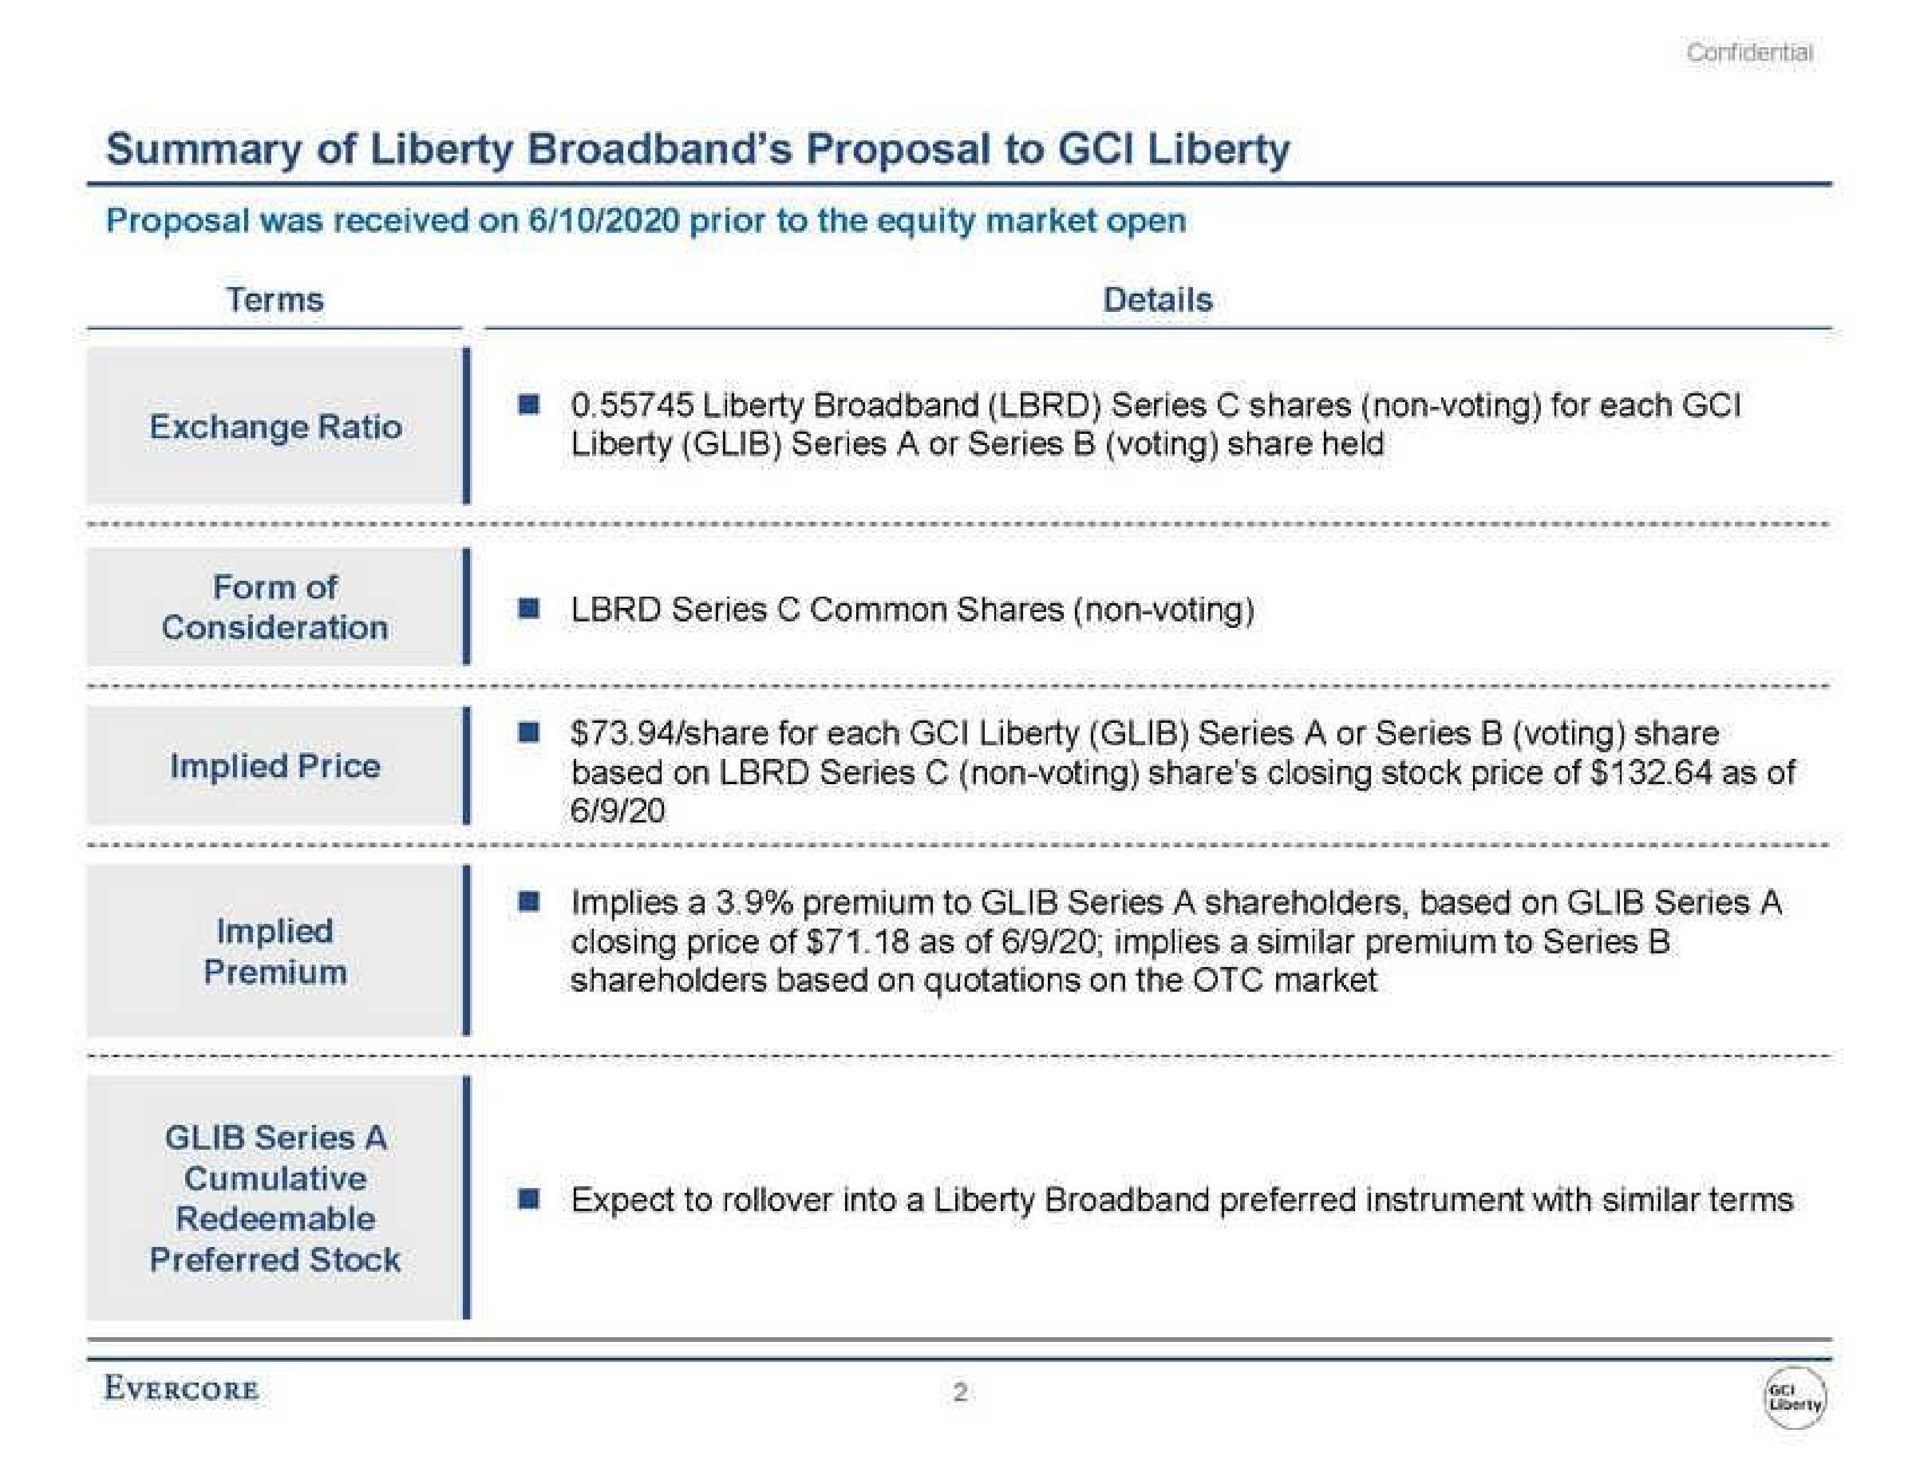 summary of liberty proposal to liberty exchange rage liberty glib series a or series voting share held series common implied price implied premium based on series non voting share closing stock price of as of closing price of as of implies a similar premium to series shareholders based on quotations on the market | Evercore